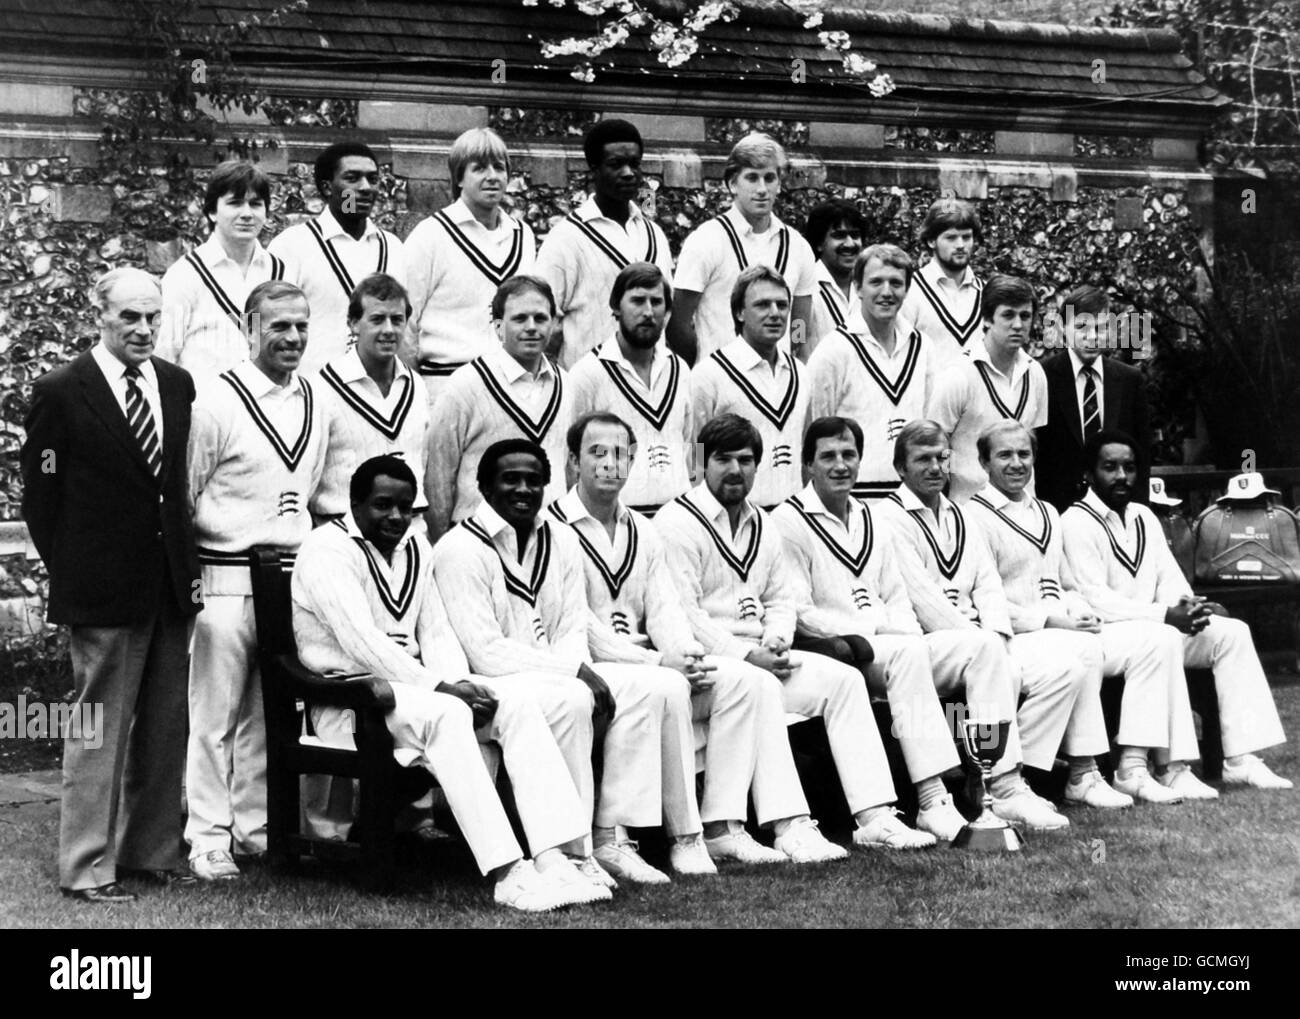 Cricket - Middlesex County Cricket Club - Team - 1983 - Lord's Stock Photo